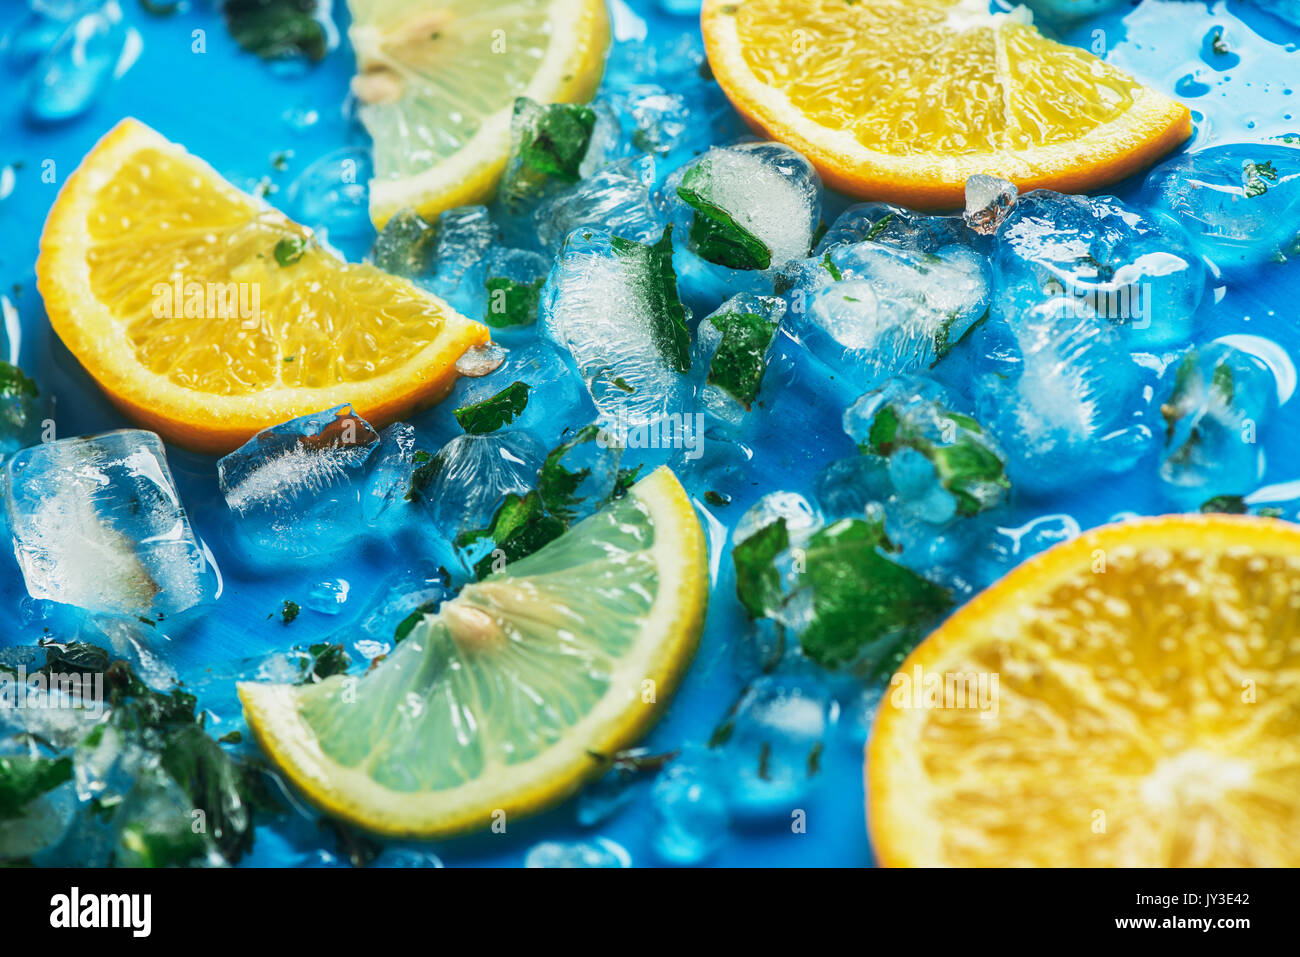 Close-up of sliced oranges and lemons on a blue background with ice cubes Stock Photo